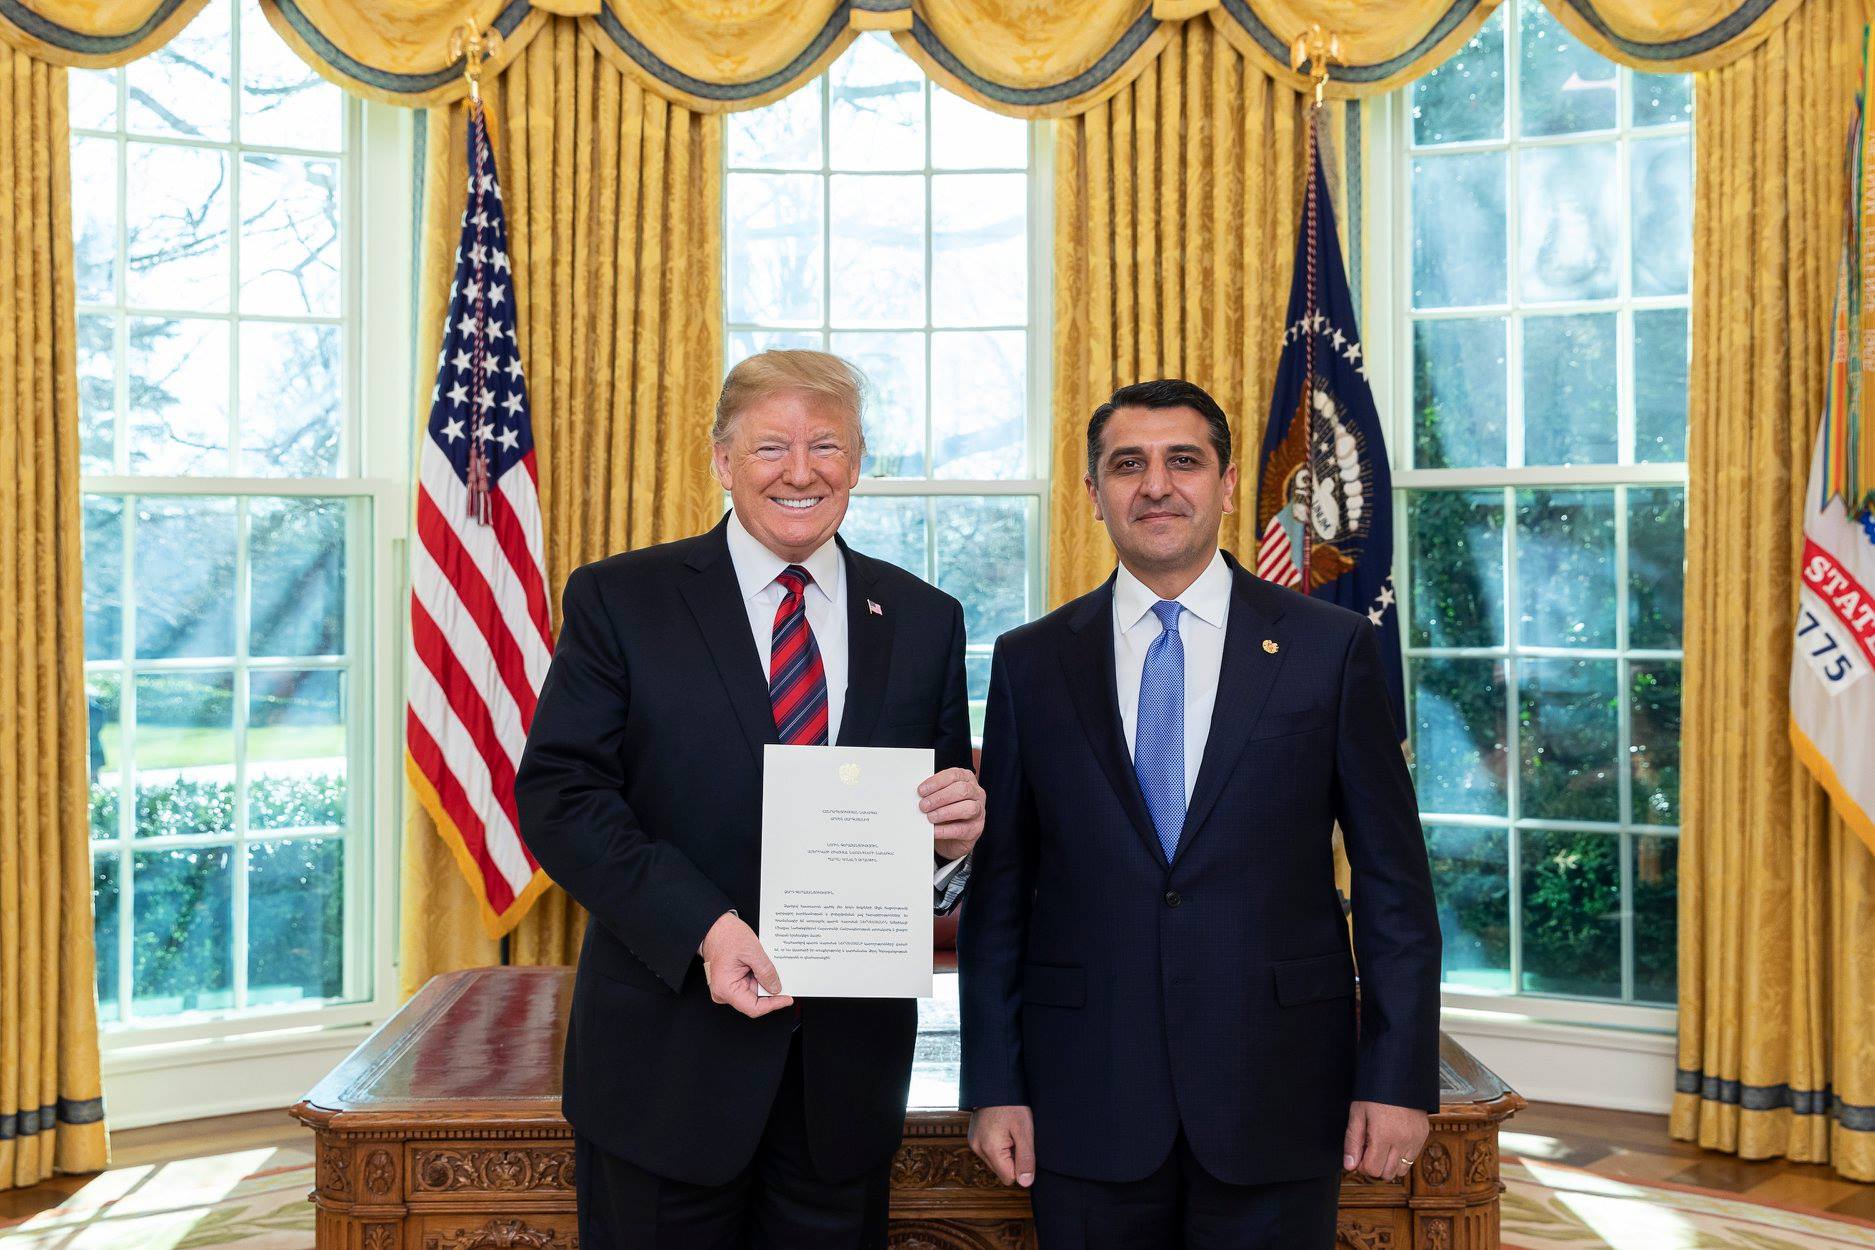 President Trump and Ambassador Nersesyan highlighted the steps towards expanding bilateral relations between Armenia and the United States